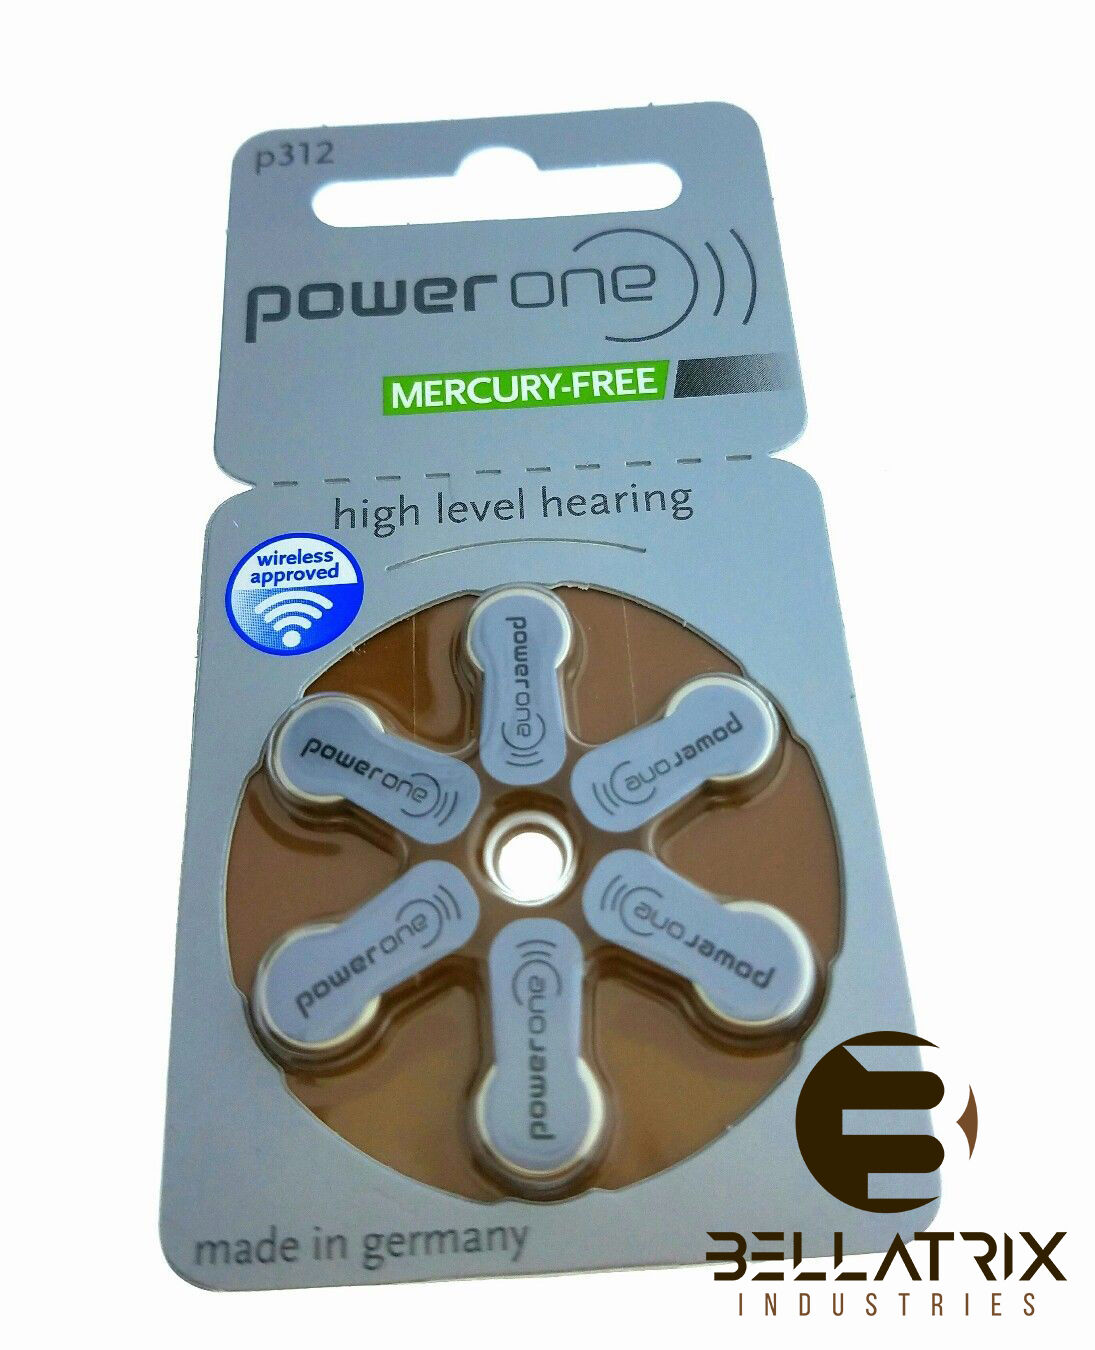 60 Power One Hearing Aid Batteries, Size 312, Newest Version Exp 2022